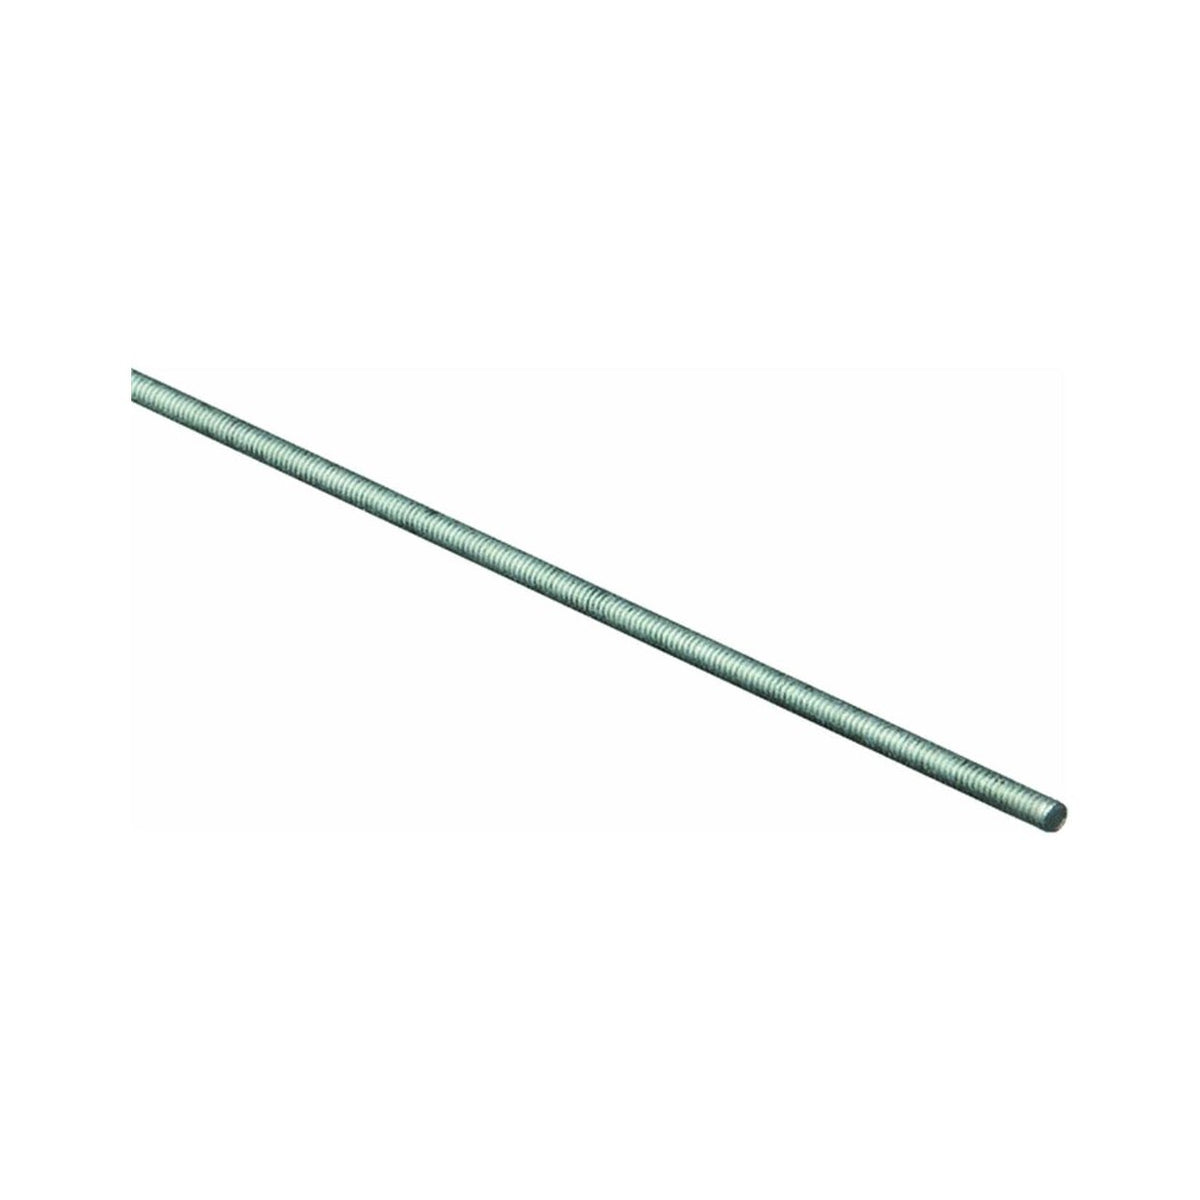 Stanley 218214 Stainless Steel Threaded Rod, 1/4"-20 x 36"